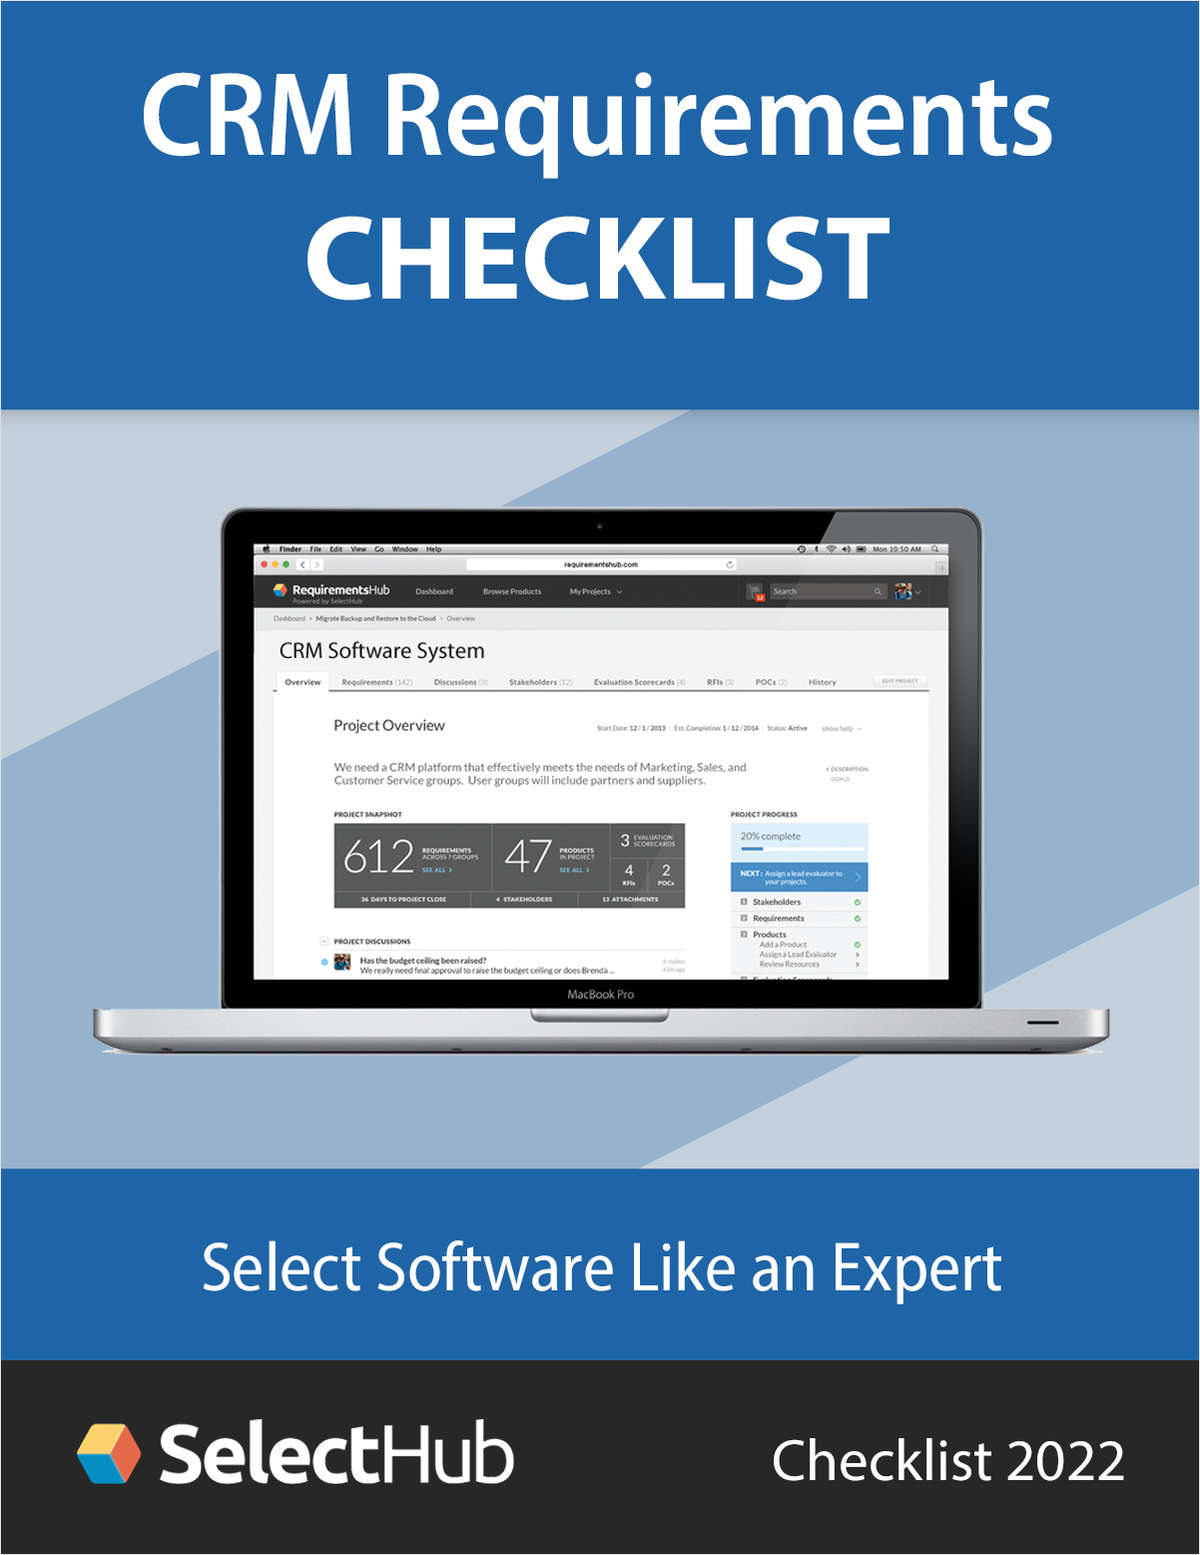 CRM Software Requirements Checklist for 2022